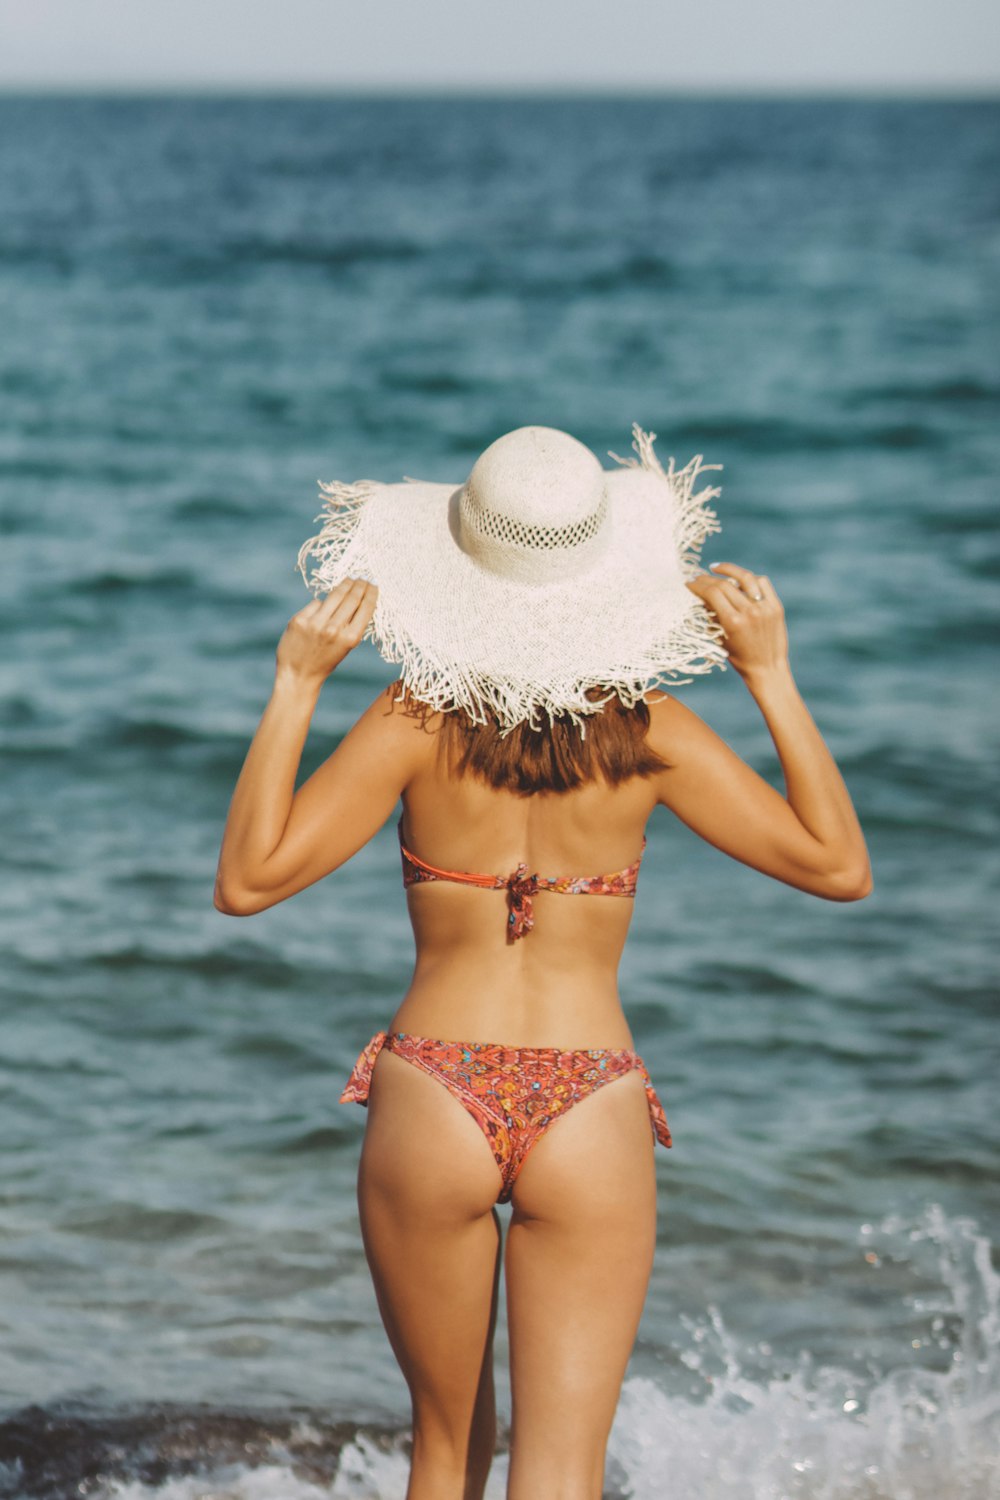 woman in white and red floral bikini wearing white sun hat standing on sea shore during